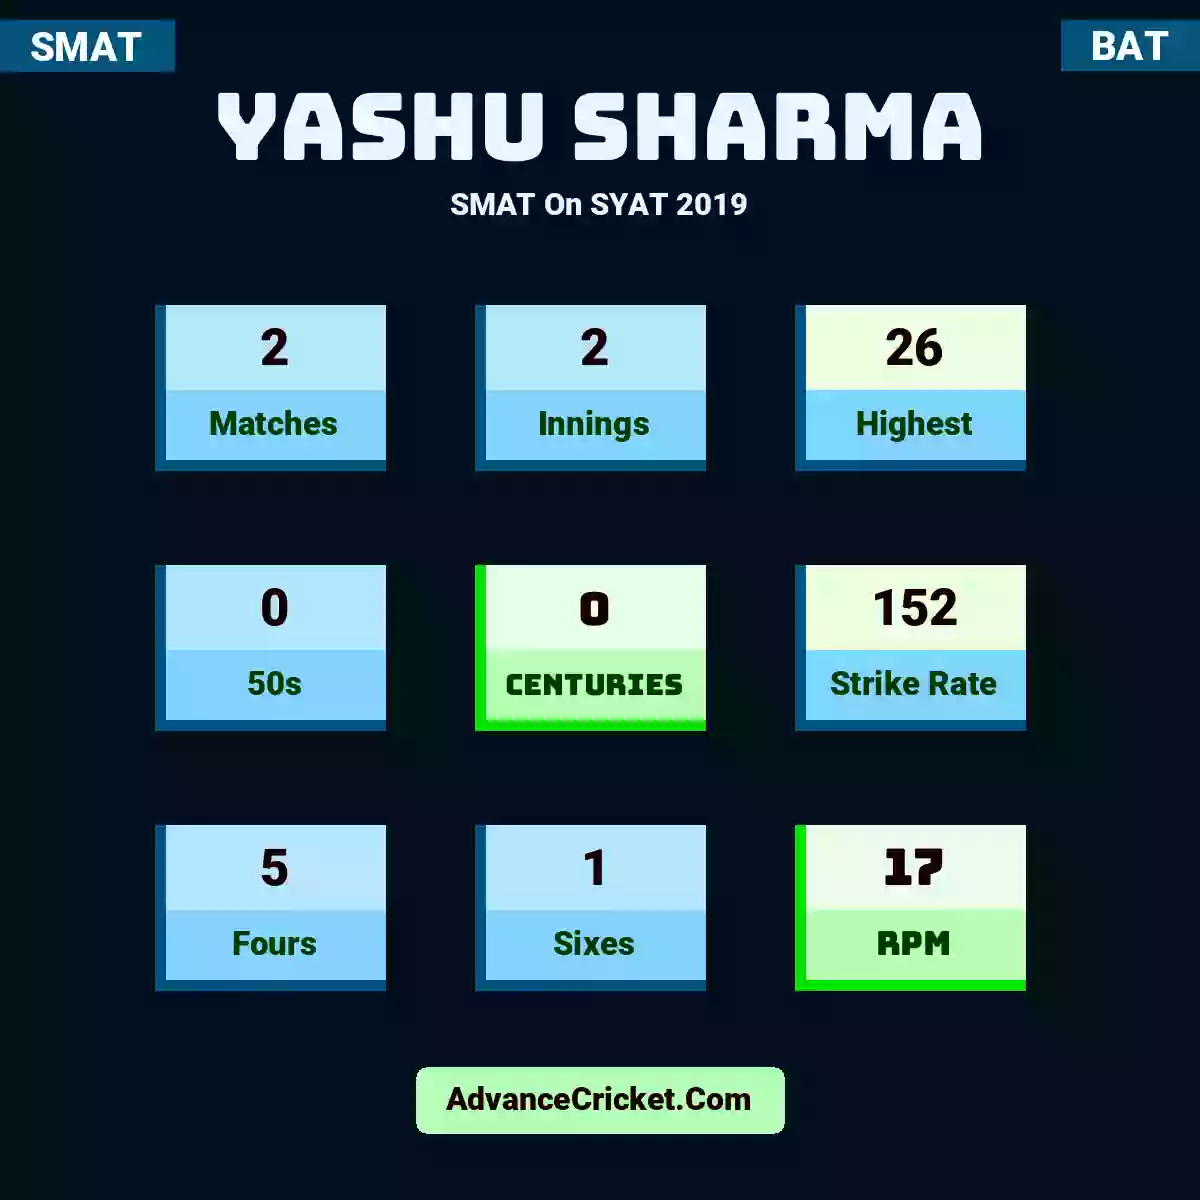 Yashu Sharma SMAT  On SYAT 2019, Yashu Sharma played 2 matches, scored 26 runs as highest, 0 half-centuries, and 0 centuries, with a strike rate of 152. Y.Sharma hit 5 fours and 1 sixes, with an RPM of 17.